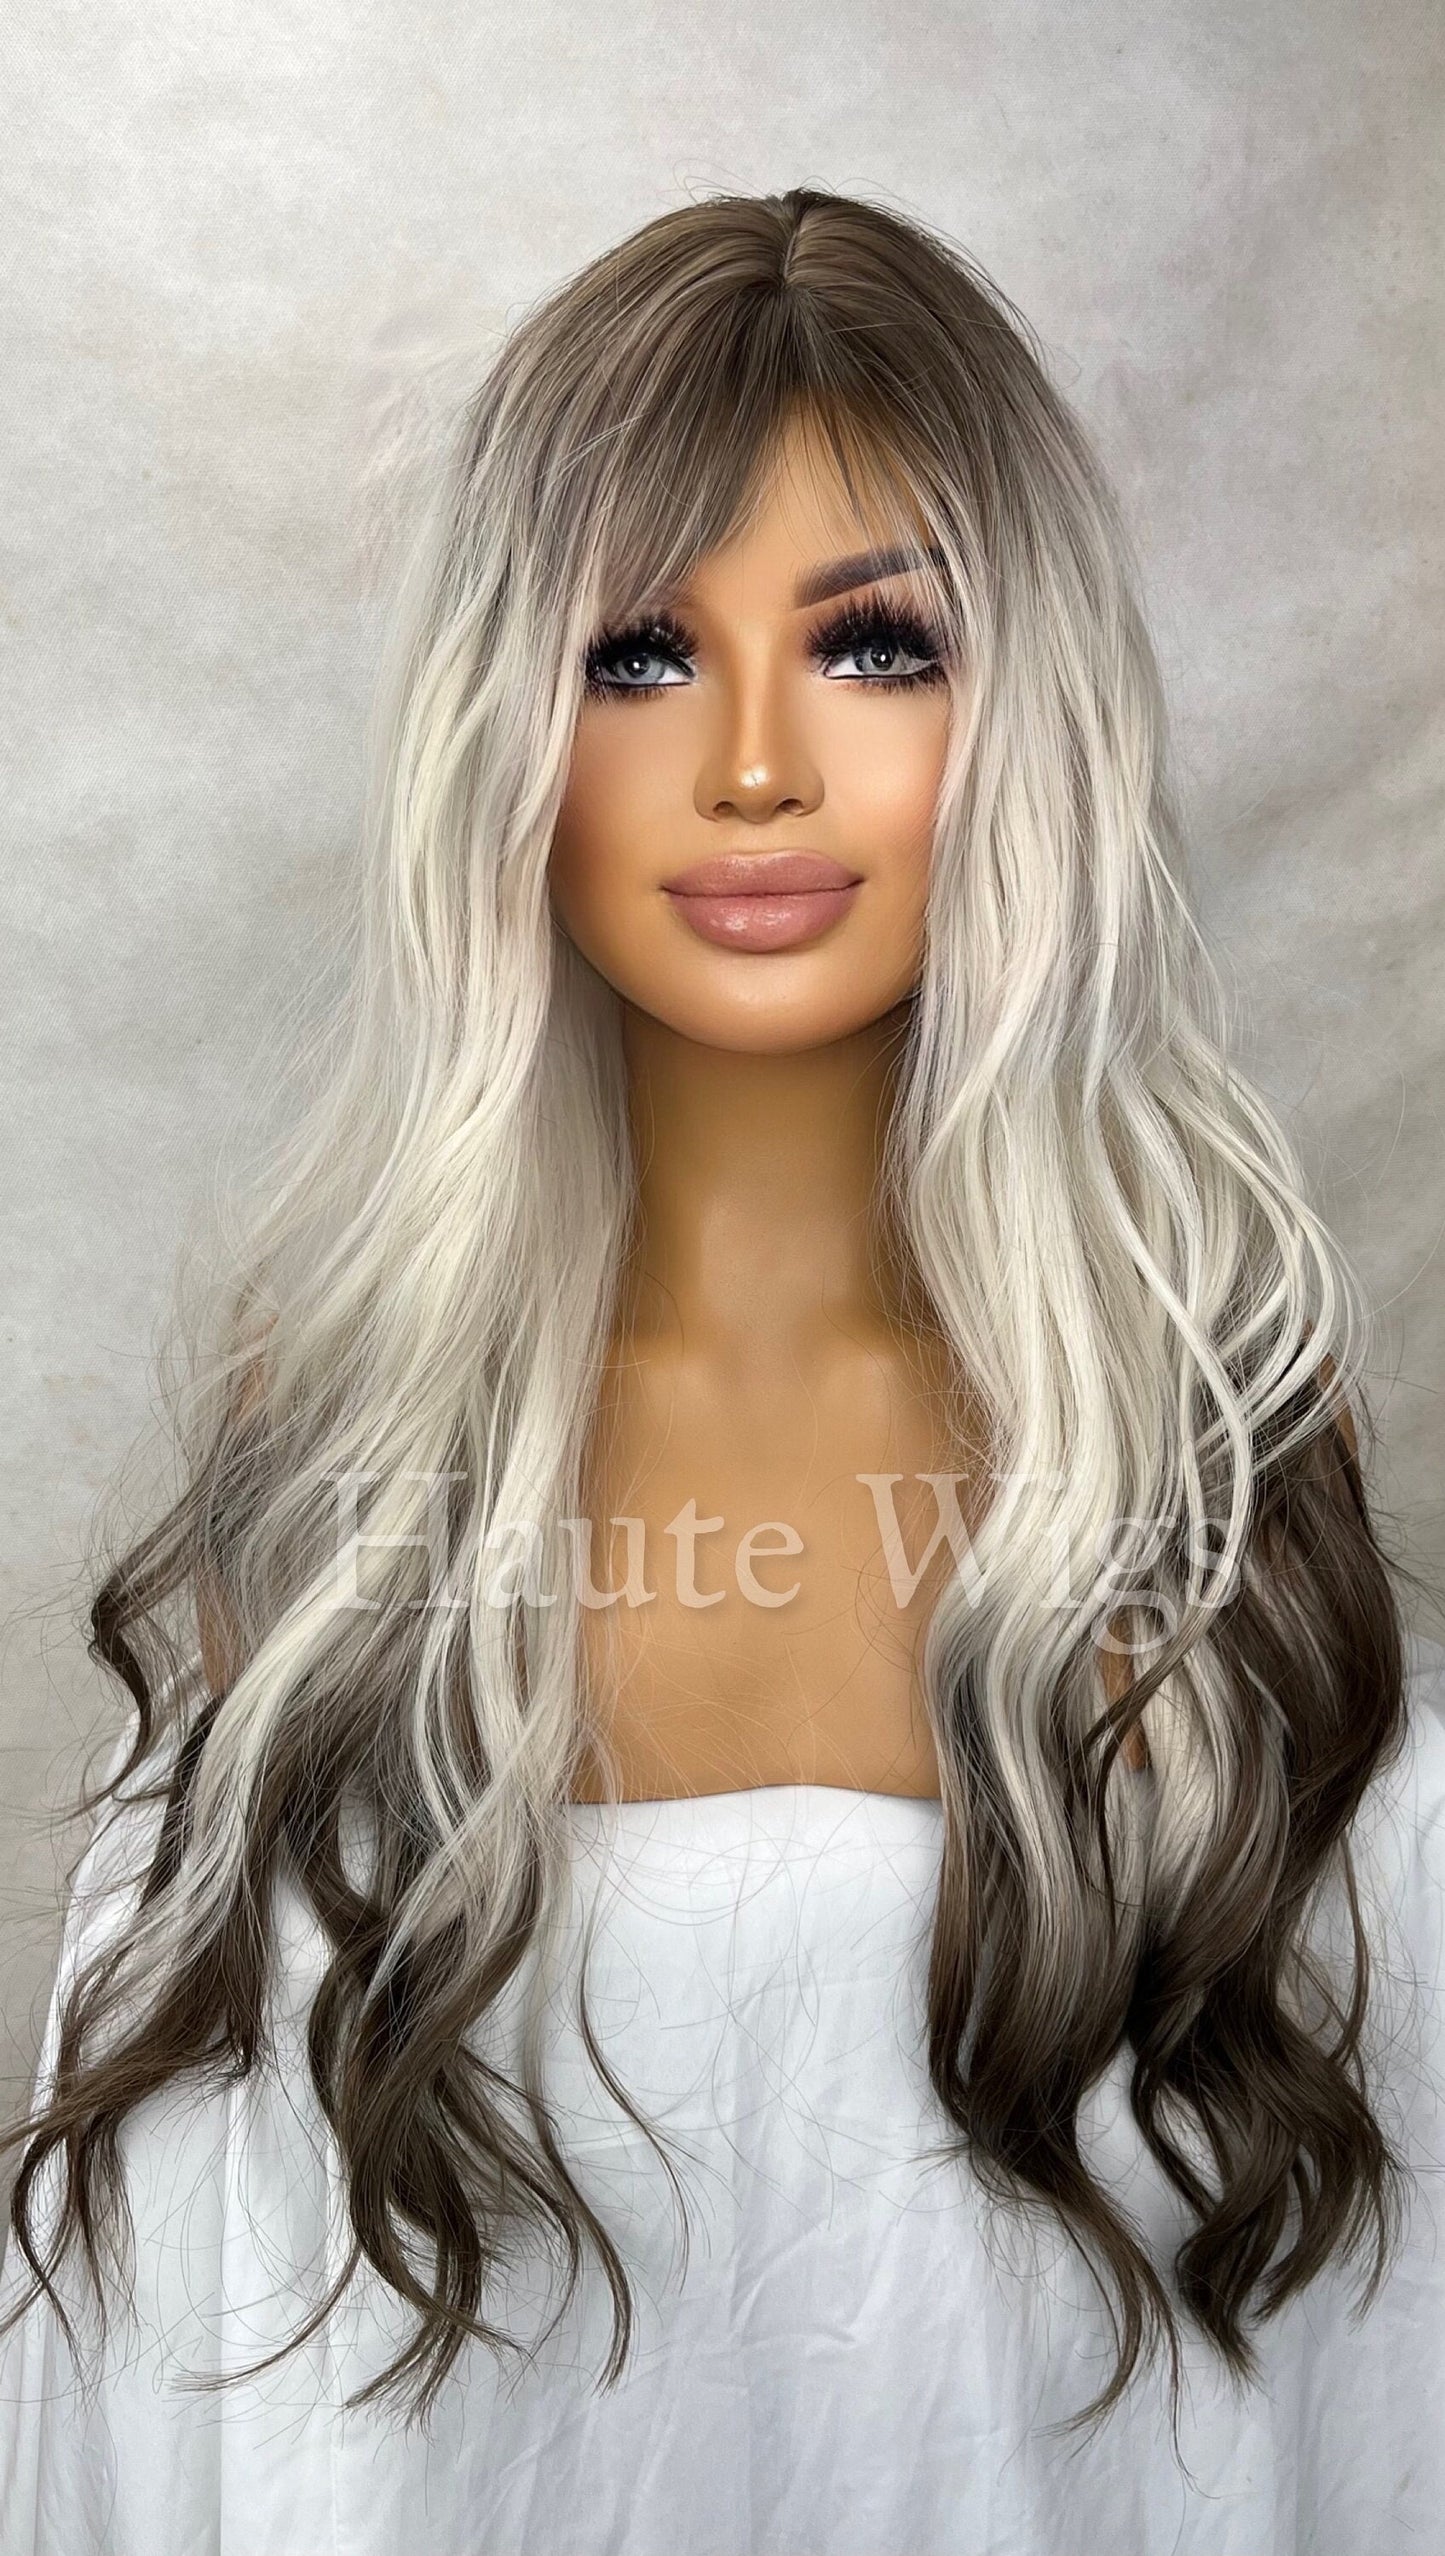 Ruffle -  Womens Ash Blonde to Brown Ombré Wig Dip dye Streaks highlights Bangs / Fringe Layered No Lace Front realistic haute Wigs 26 inch